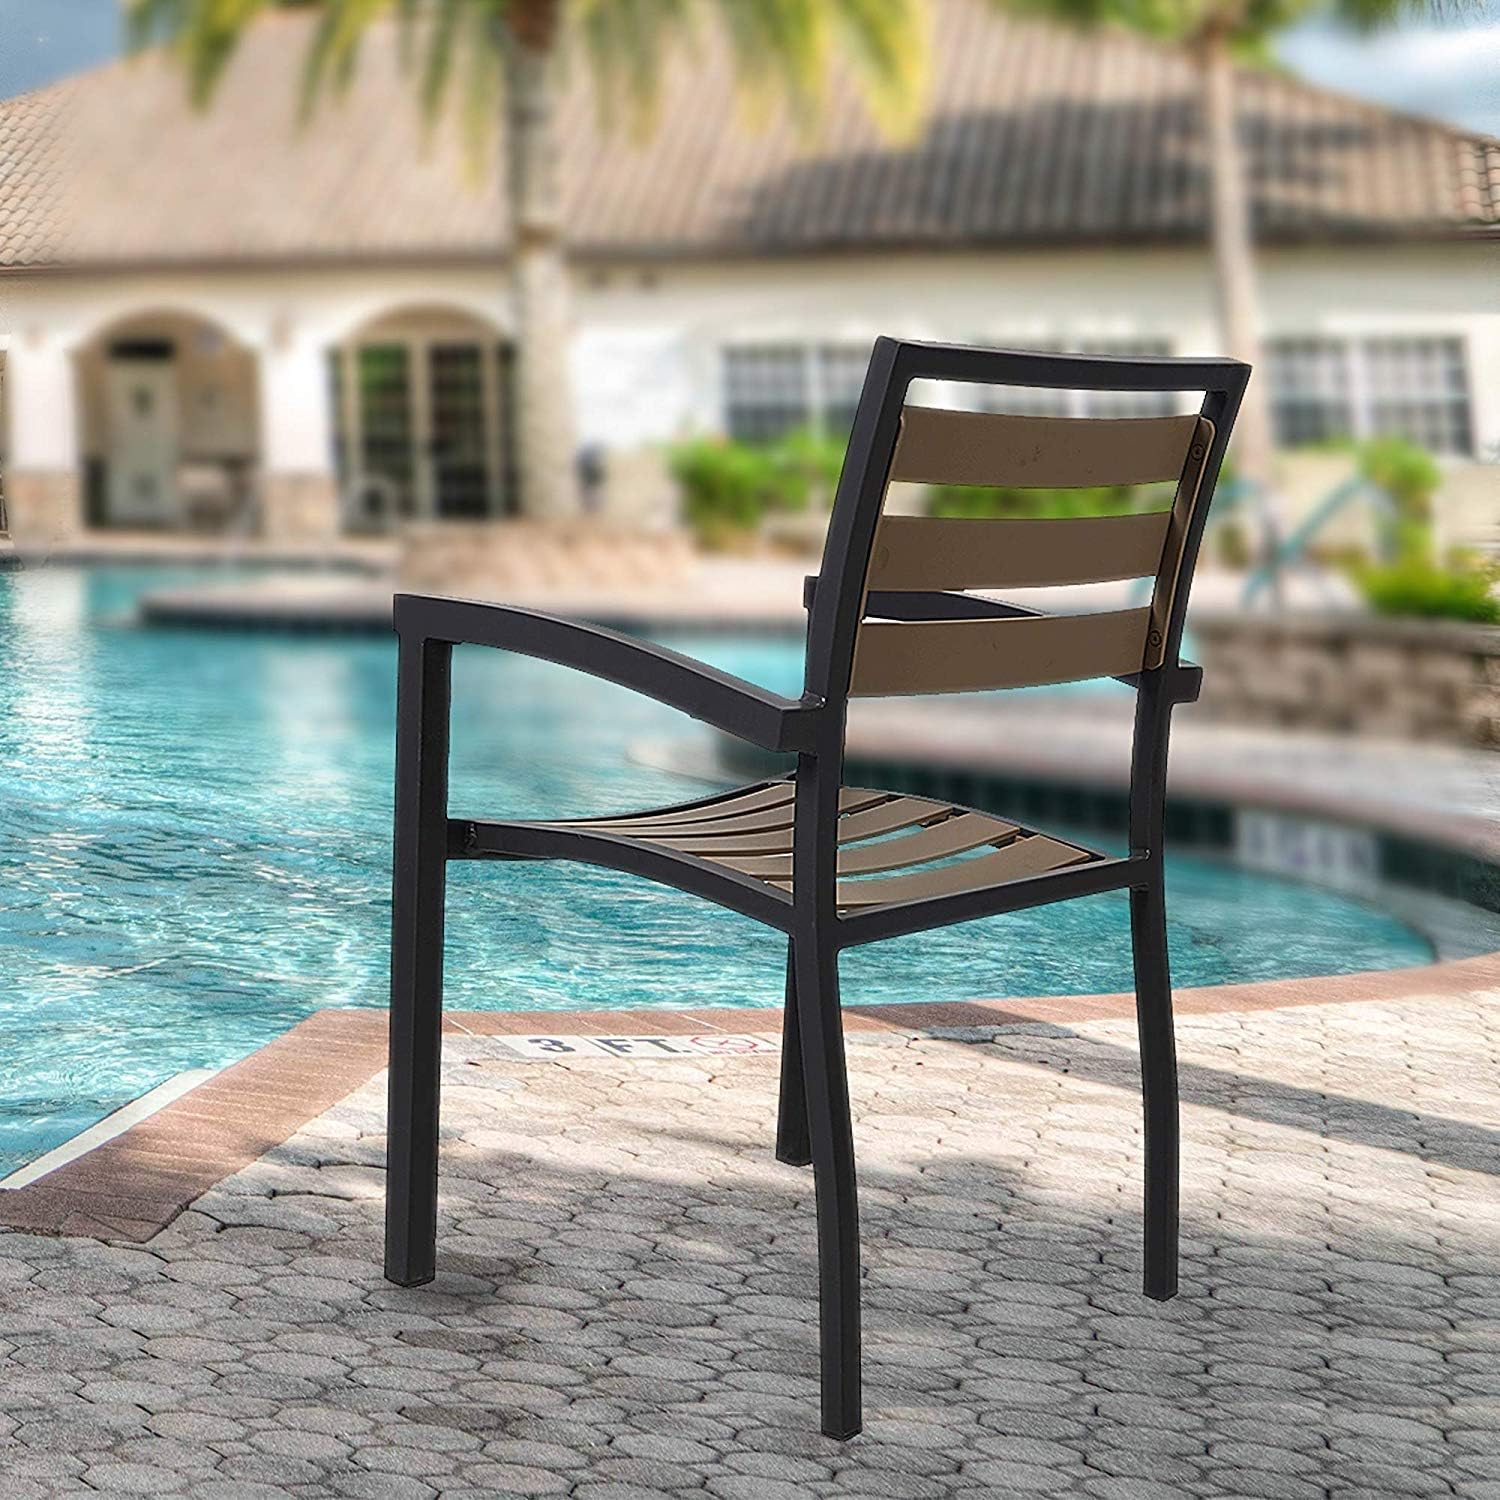 Set of 4 Patio Chairs with Armrest Aluminum Frame Outdoor Dining Chair Stackable Armchair